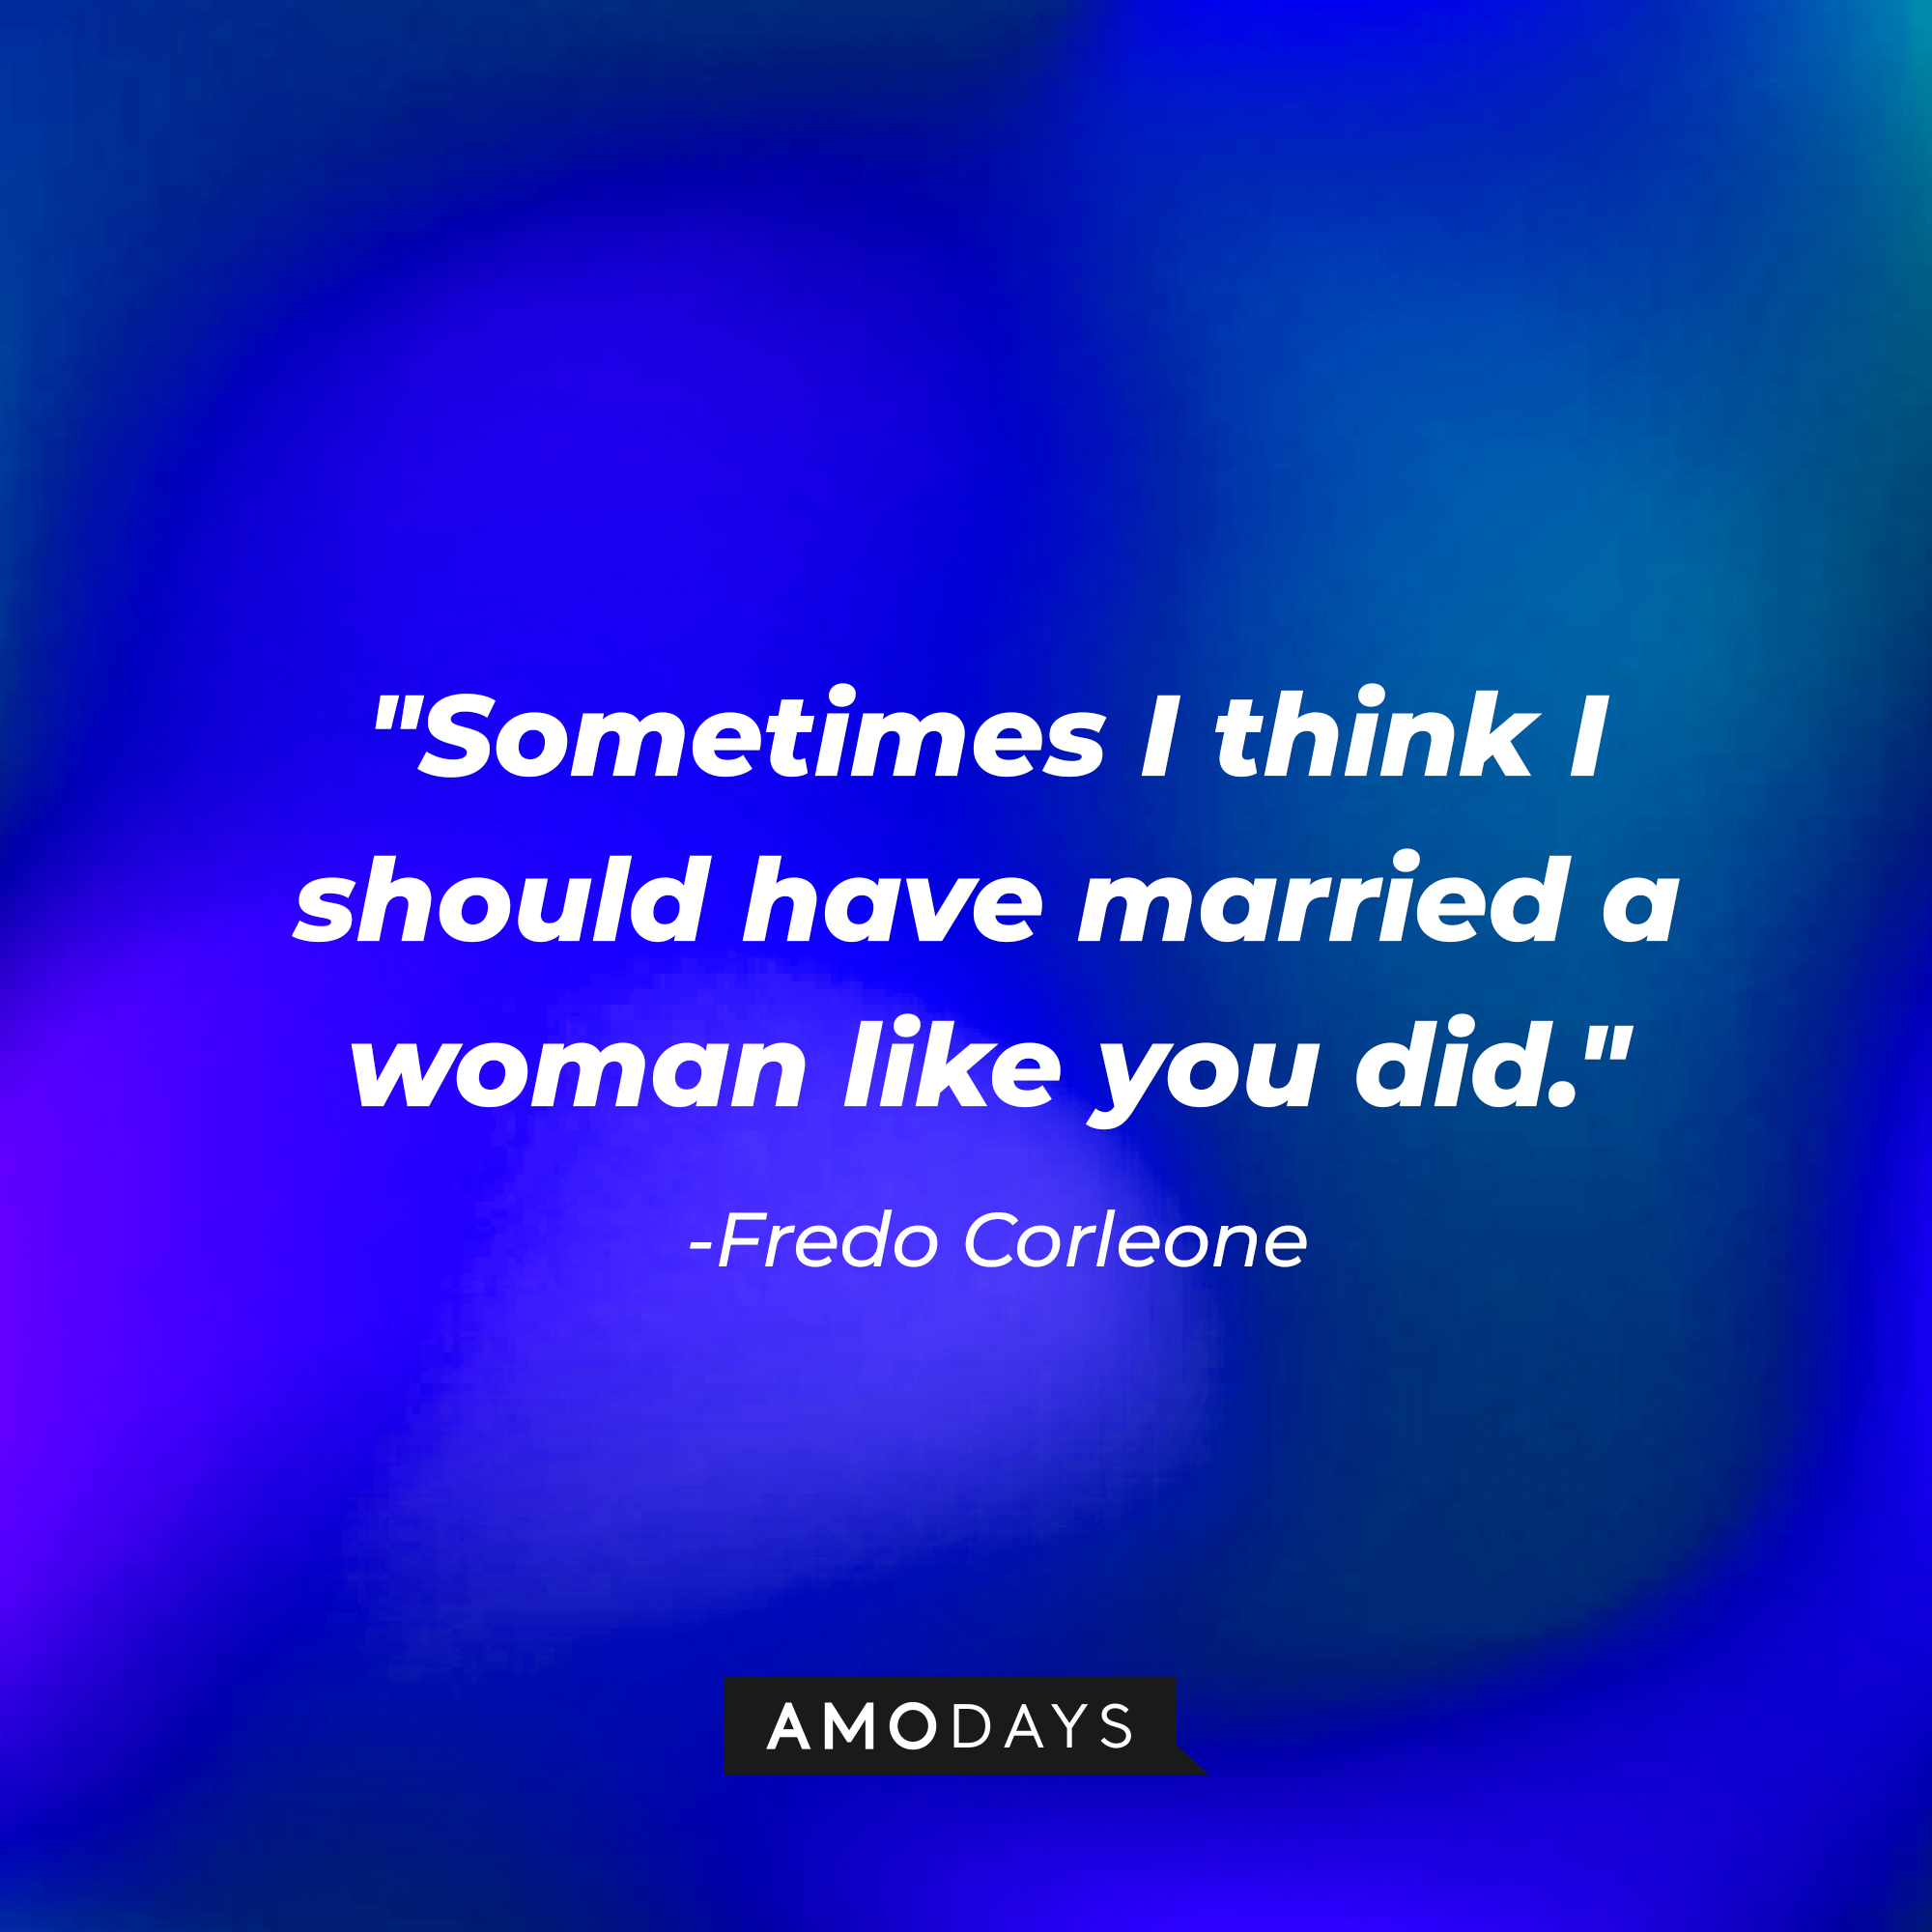 Fredo Corleone’s quote: "Sometimes I think I should have married a woman like you did." | Source: AmoDays